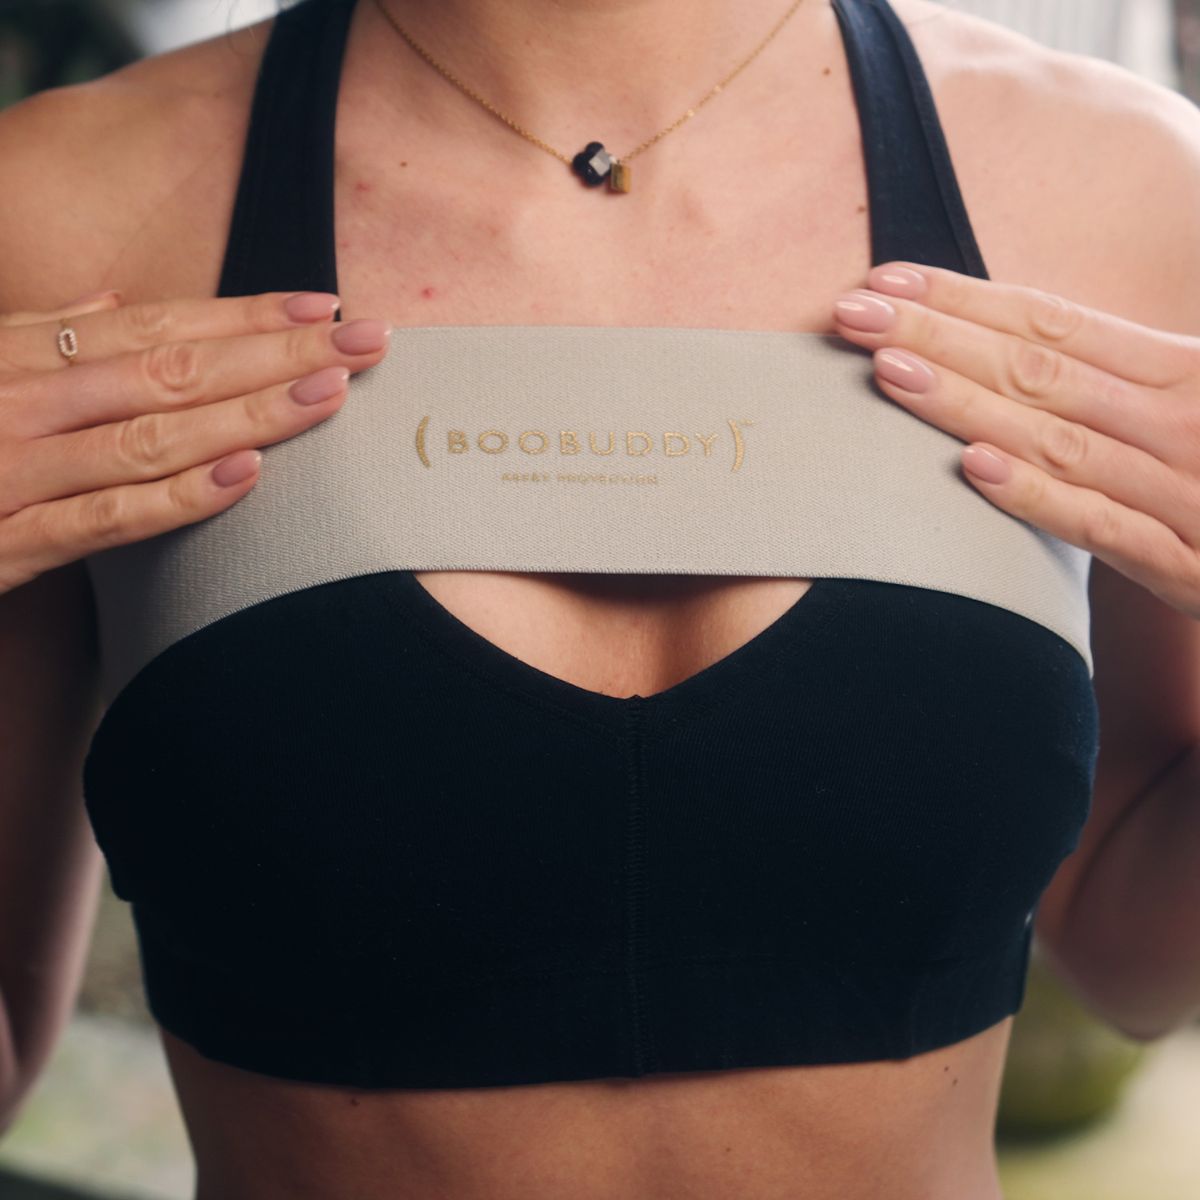 Boobuddy Breast Support Band *OFFICIAL SELLER* - The Sports Bra Alternative